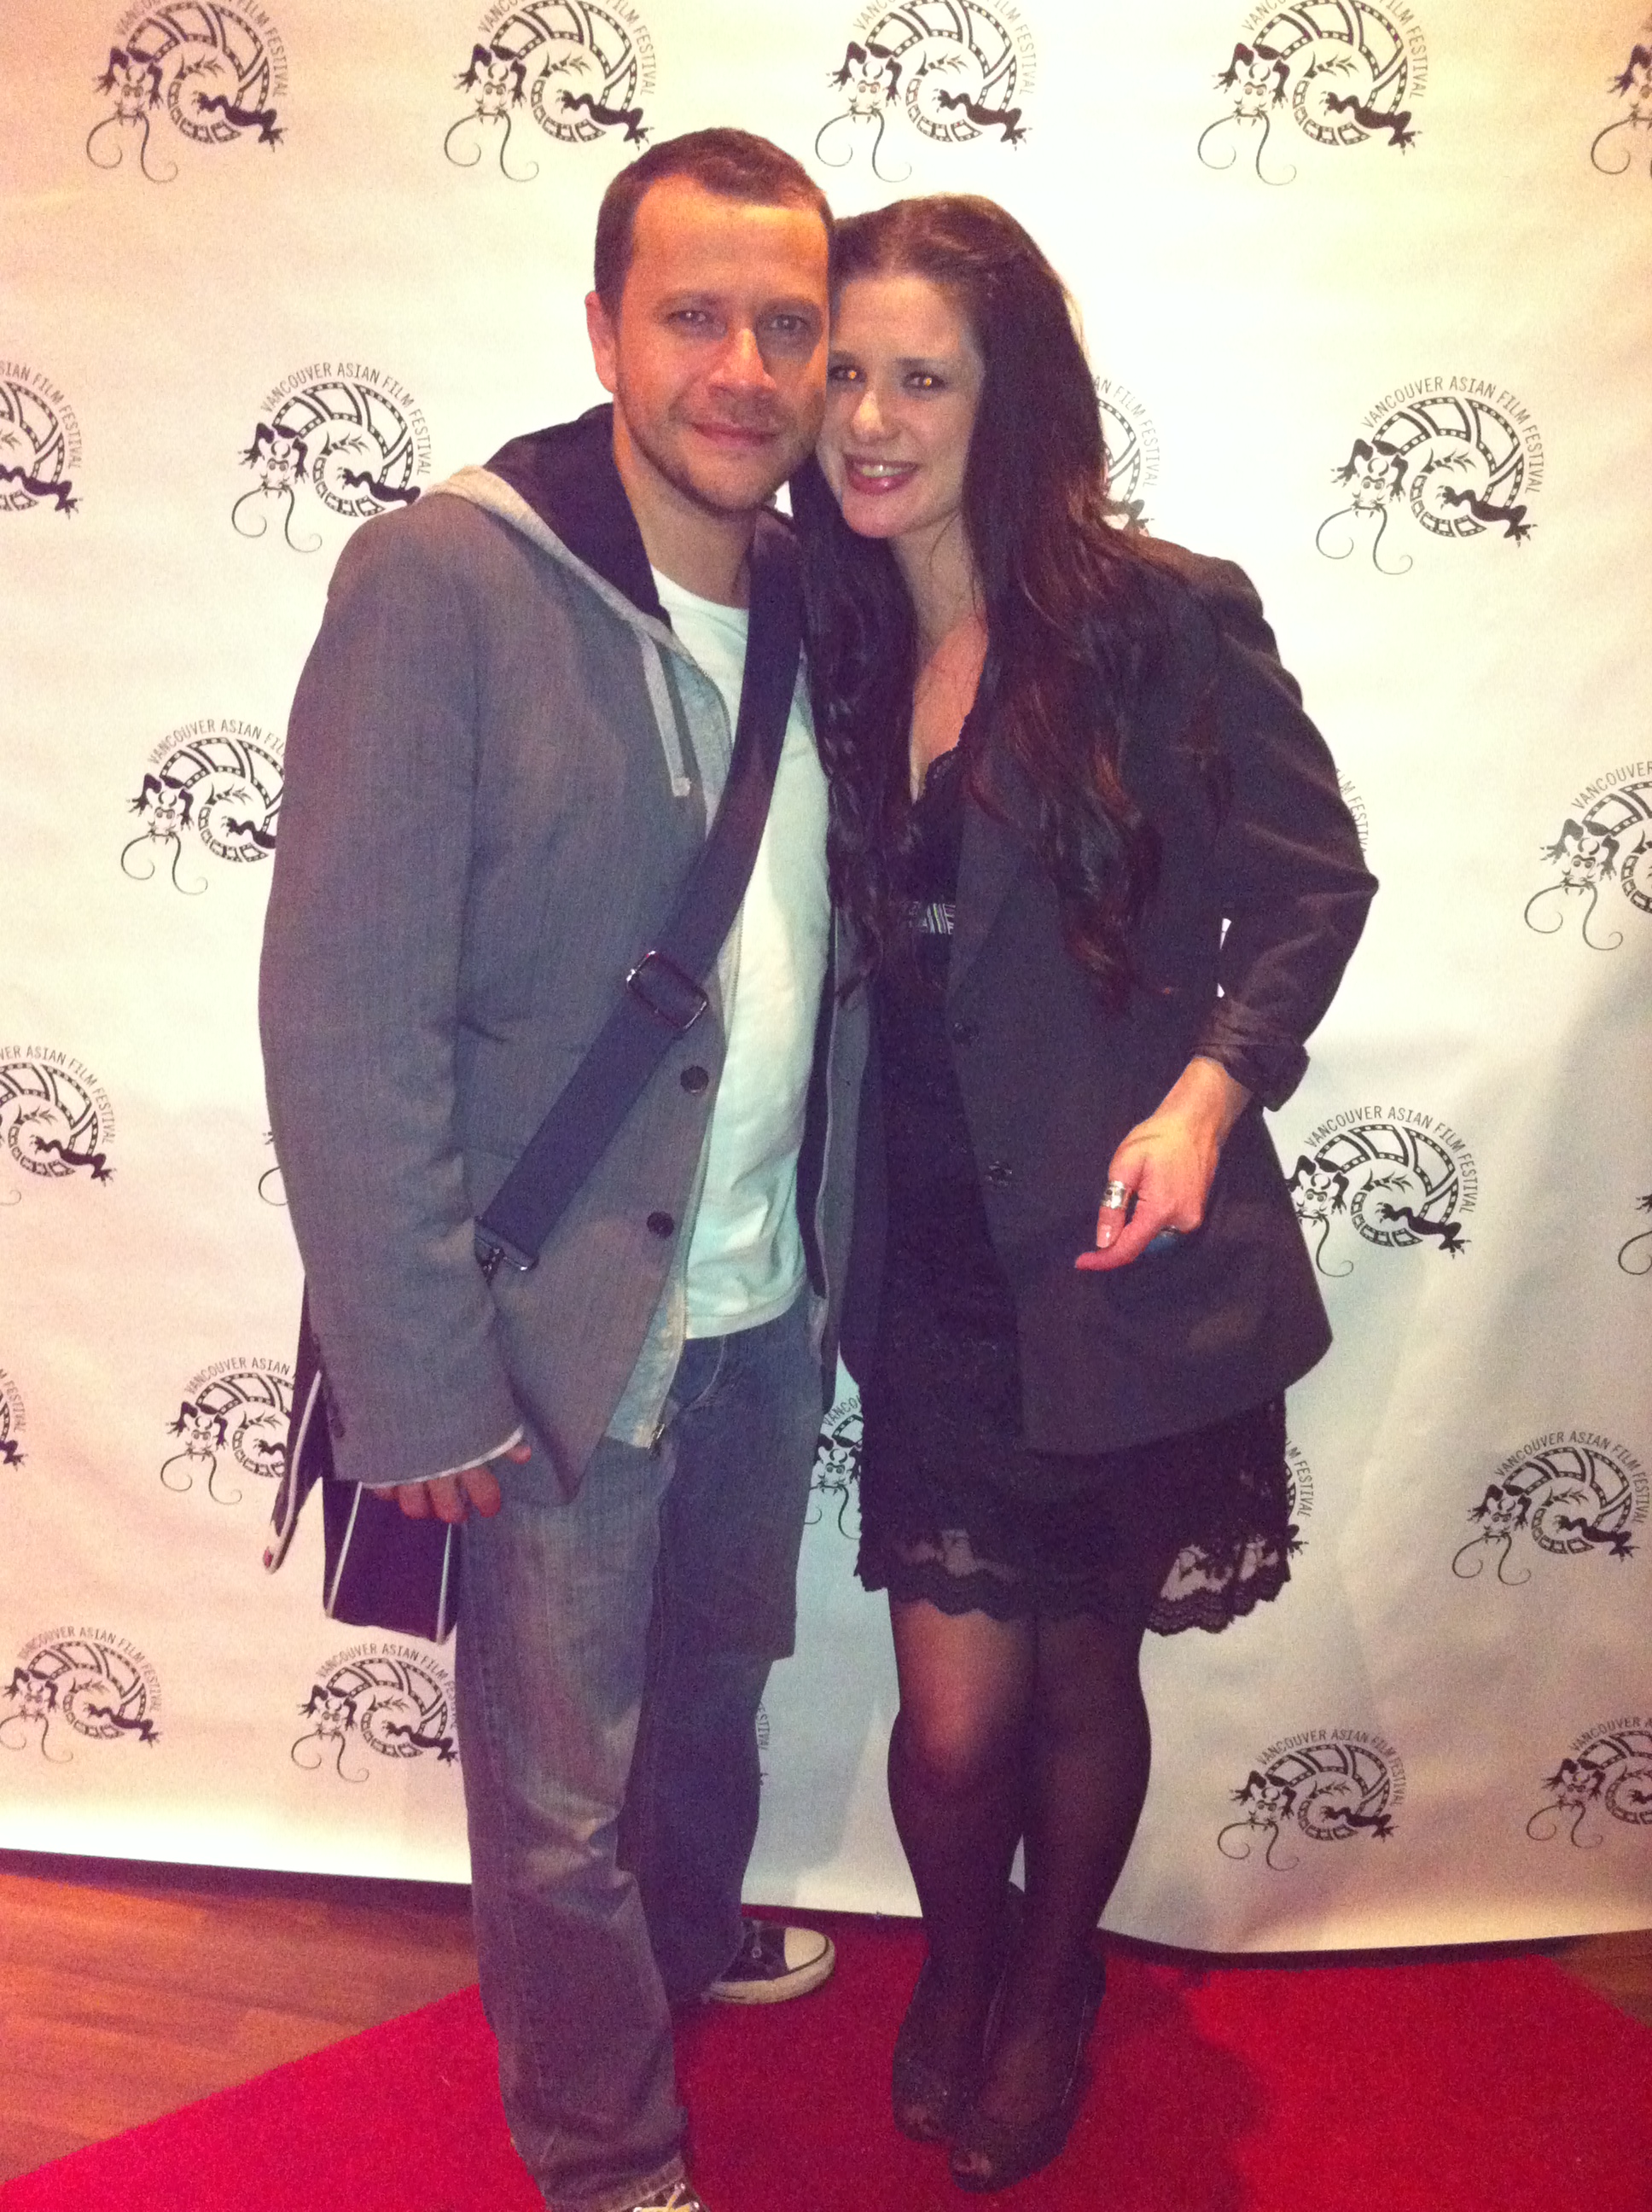 Asian Film Festival 2011 with Aaron Alexander of BC Buzz